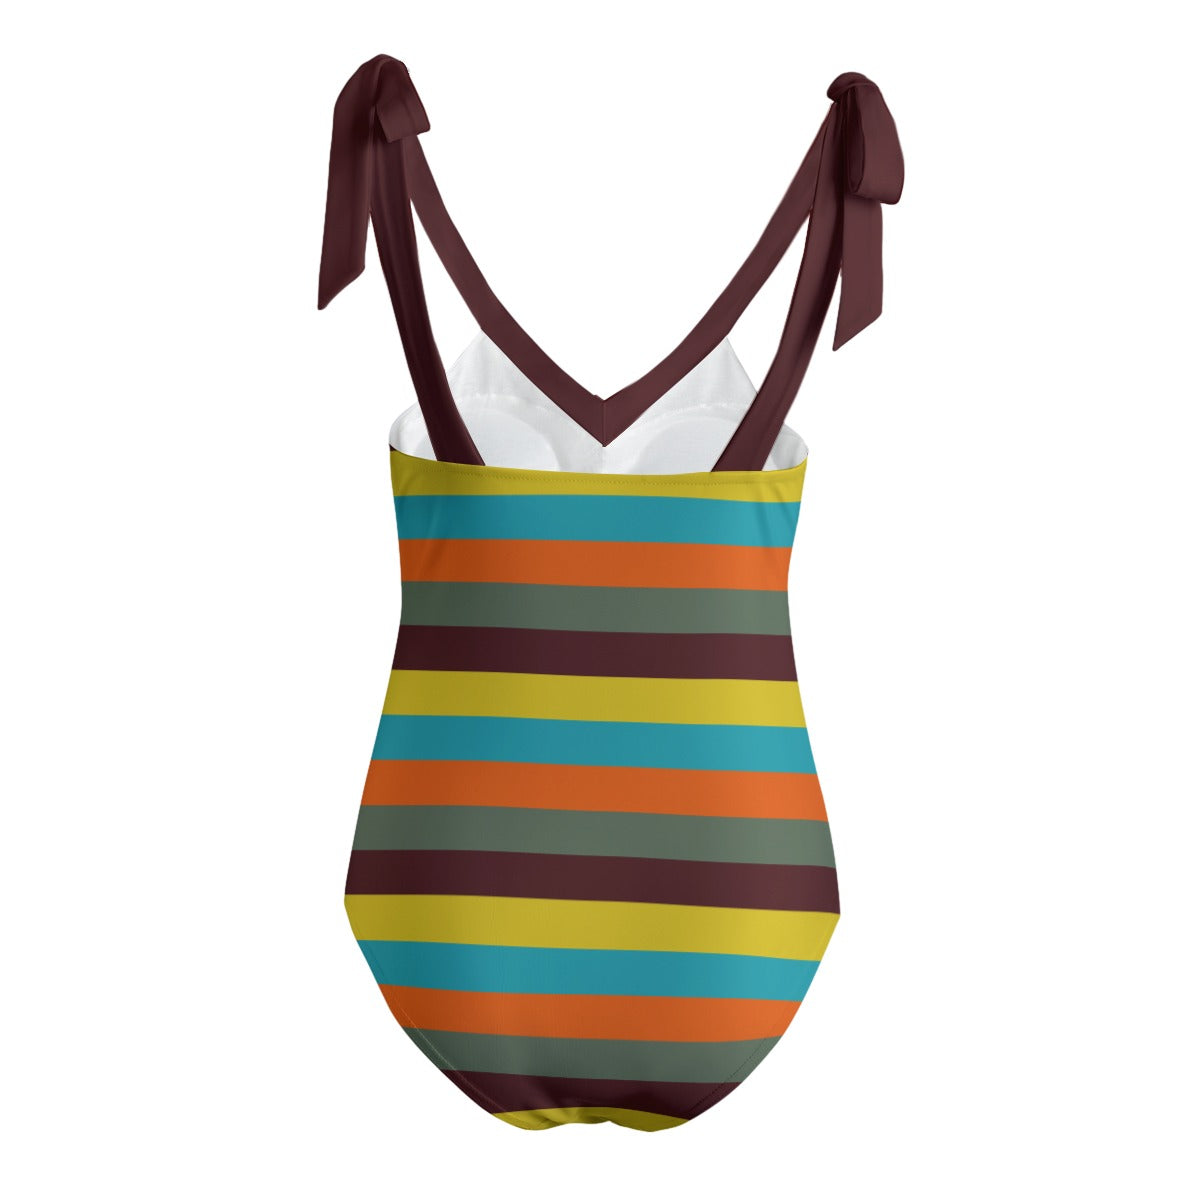 Vampire Art Retro Women's Tie Shoulder One-piece Padded Swimsuit - Seventies Stripes with Turquoise